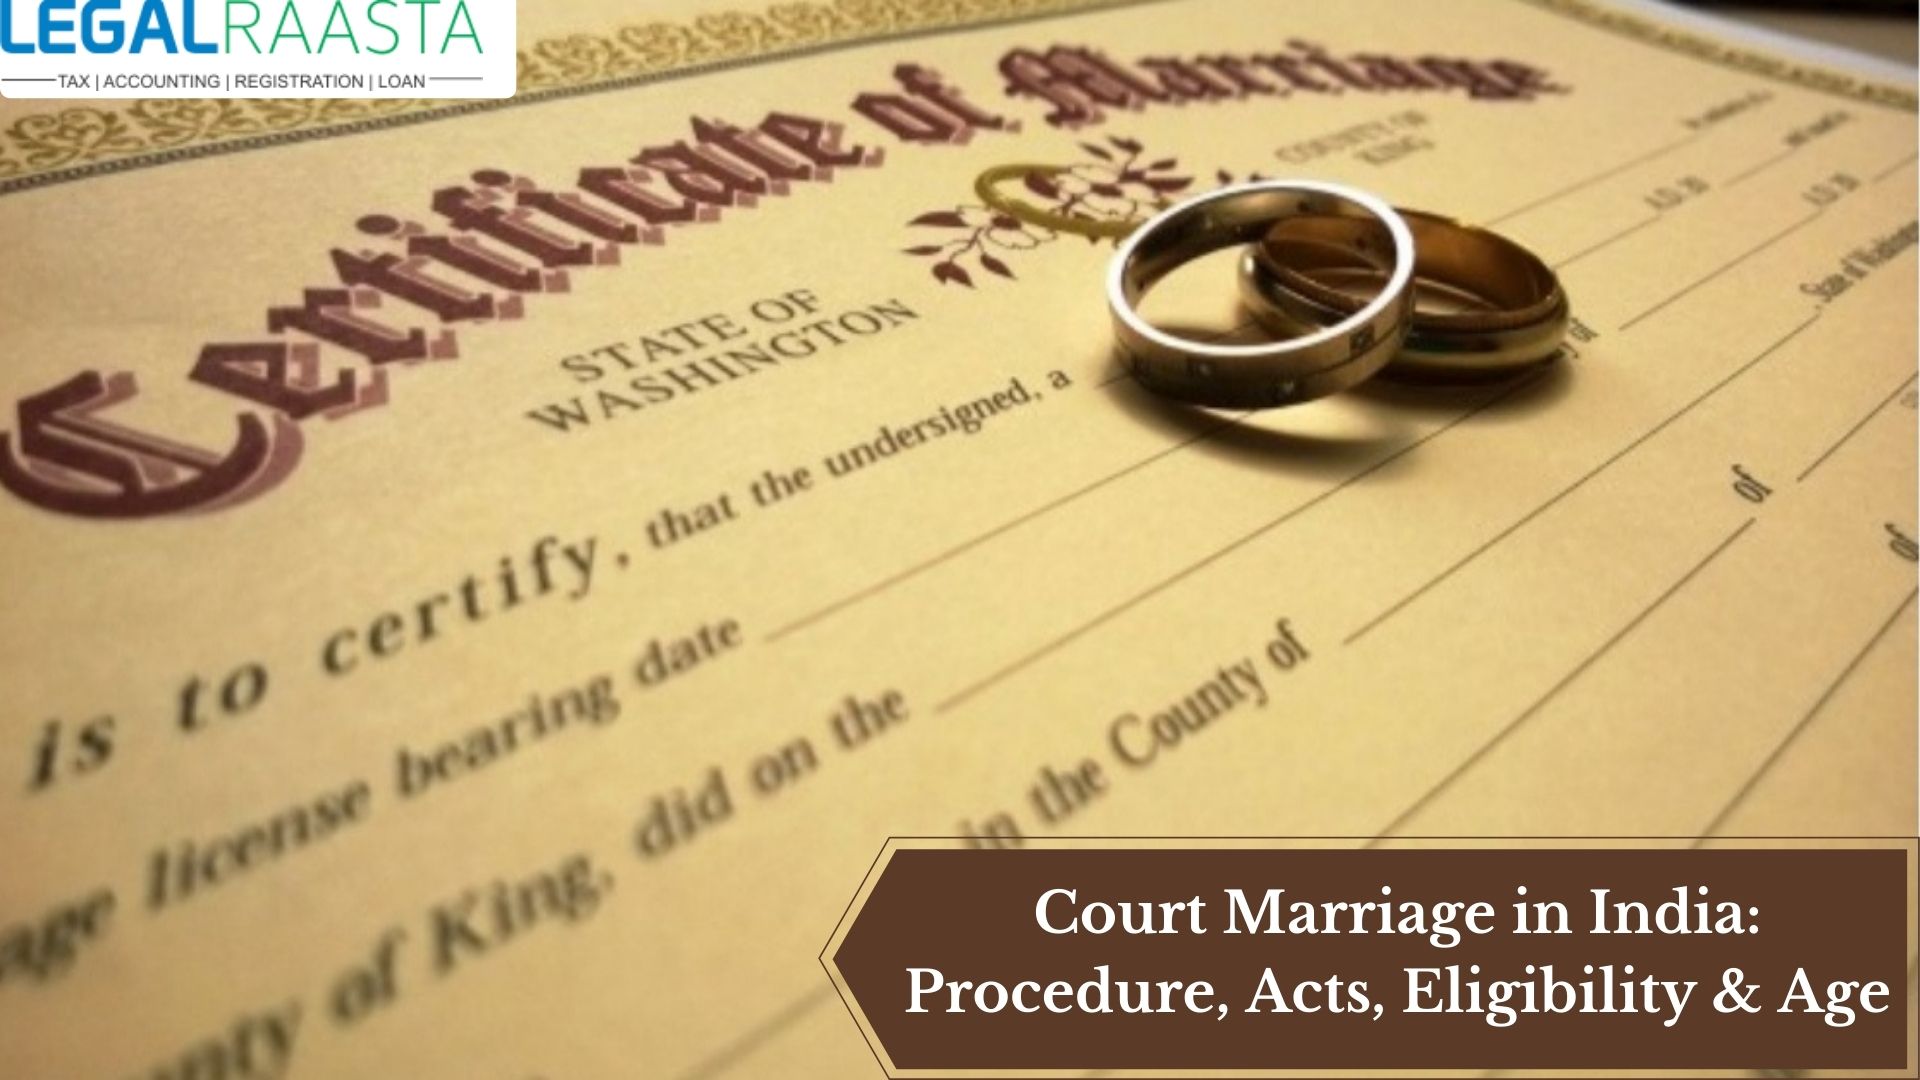 Court Marriage in India: Procedure, Acts, Eligibility & Age